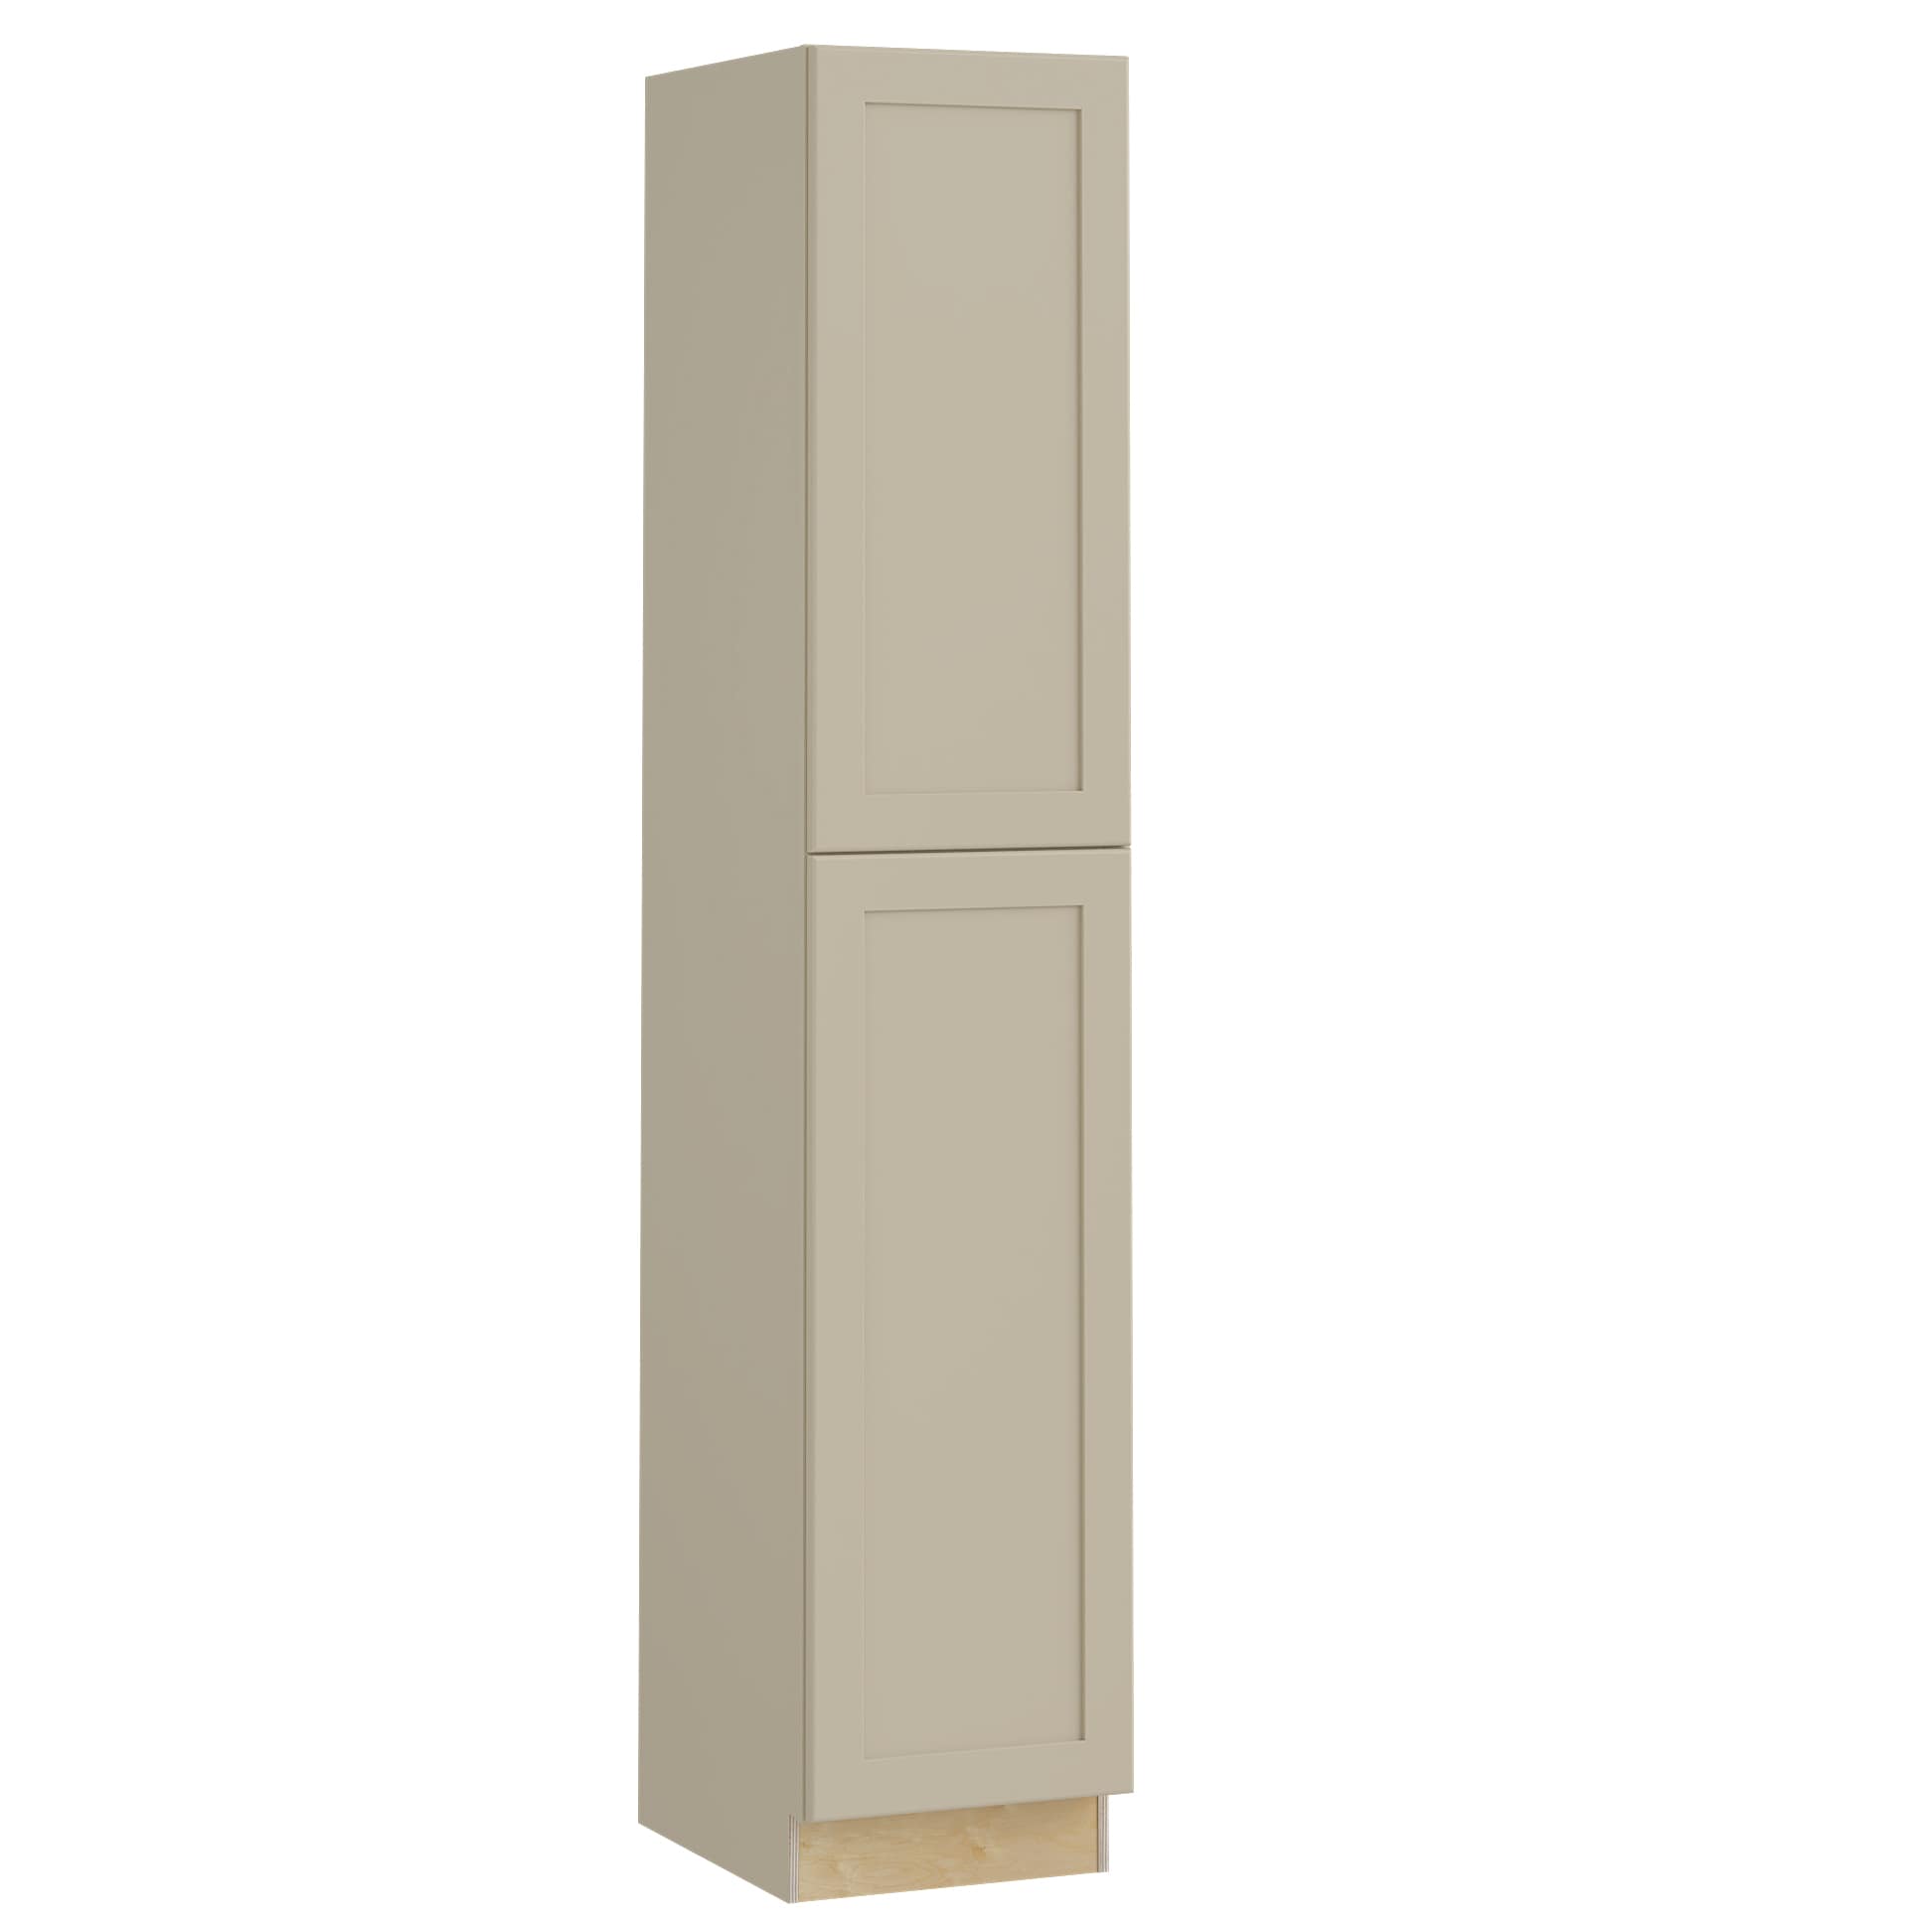 Luxxe Cabinetry 18-in W x 90-in H x 24-in D Norfolk Blended Cream Painted Door Pantry Fully Assembled Semi-custom Cabinet in Off-White | U182490R-NBC